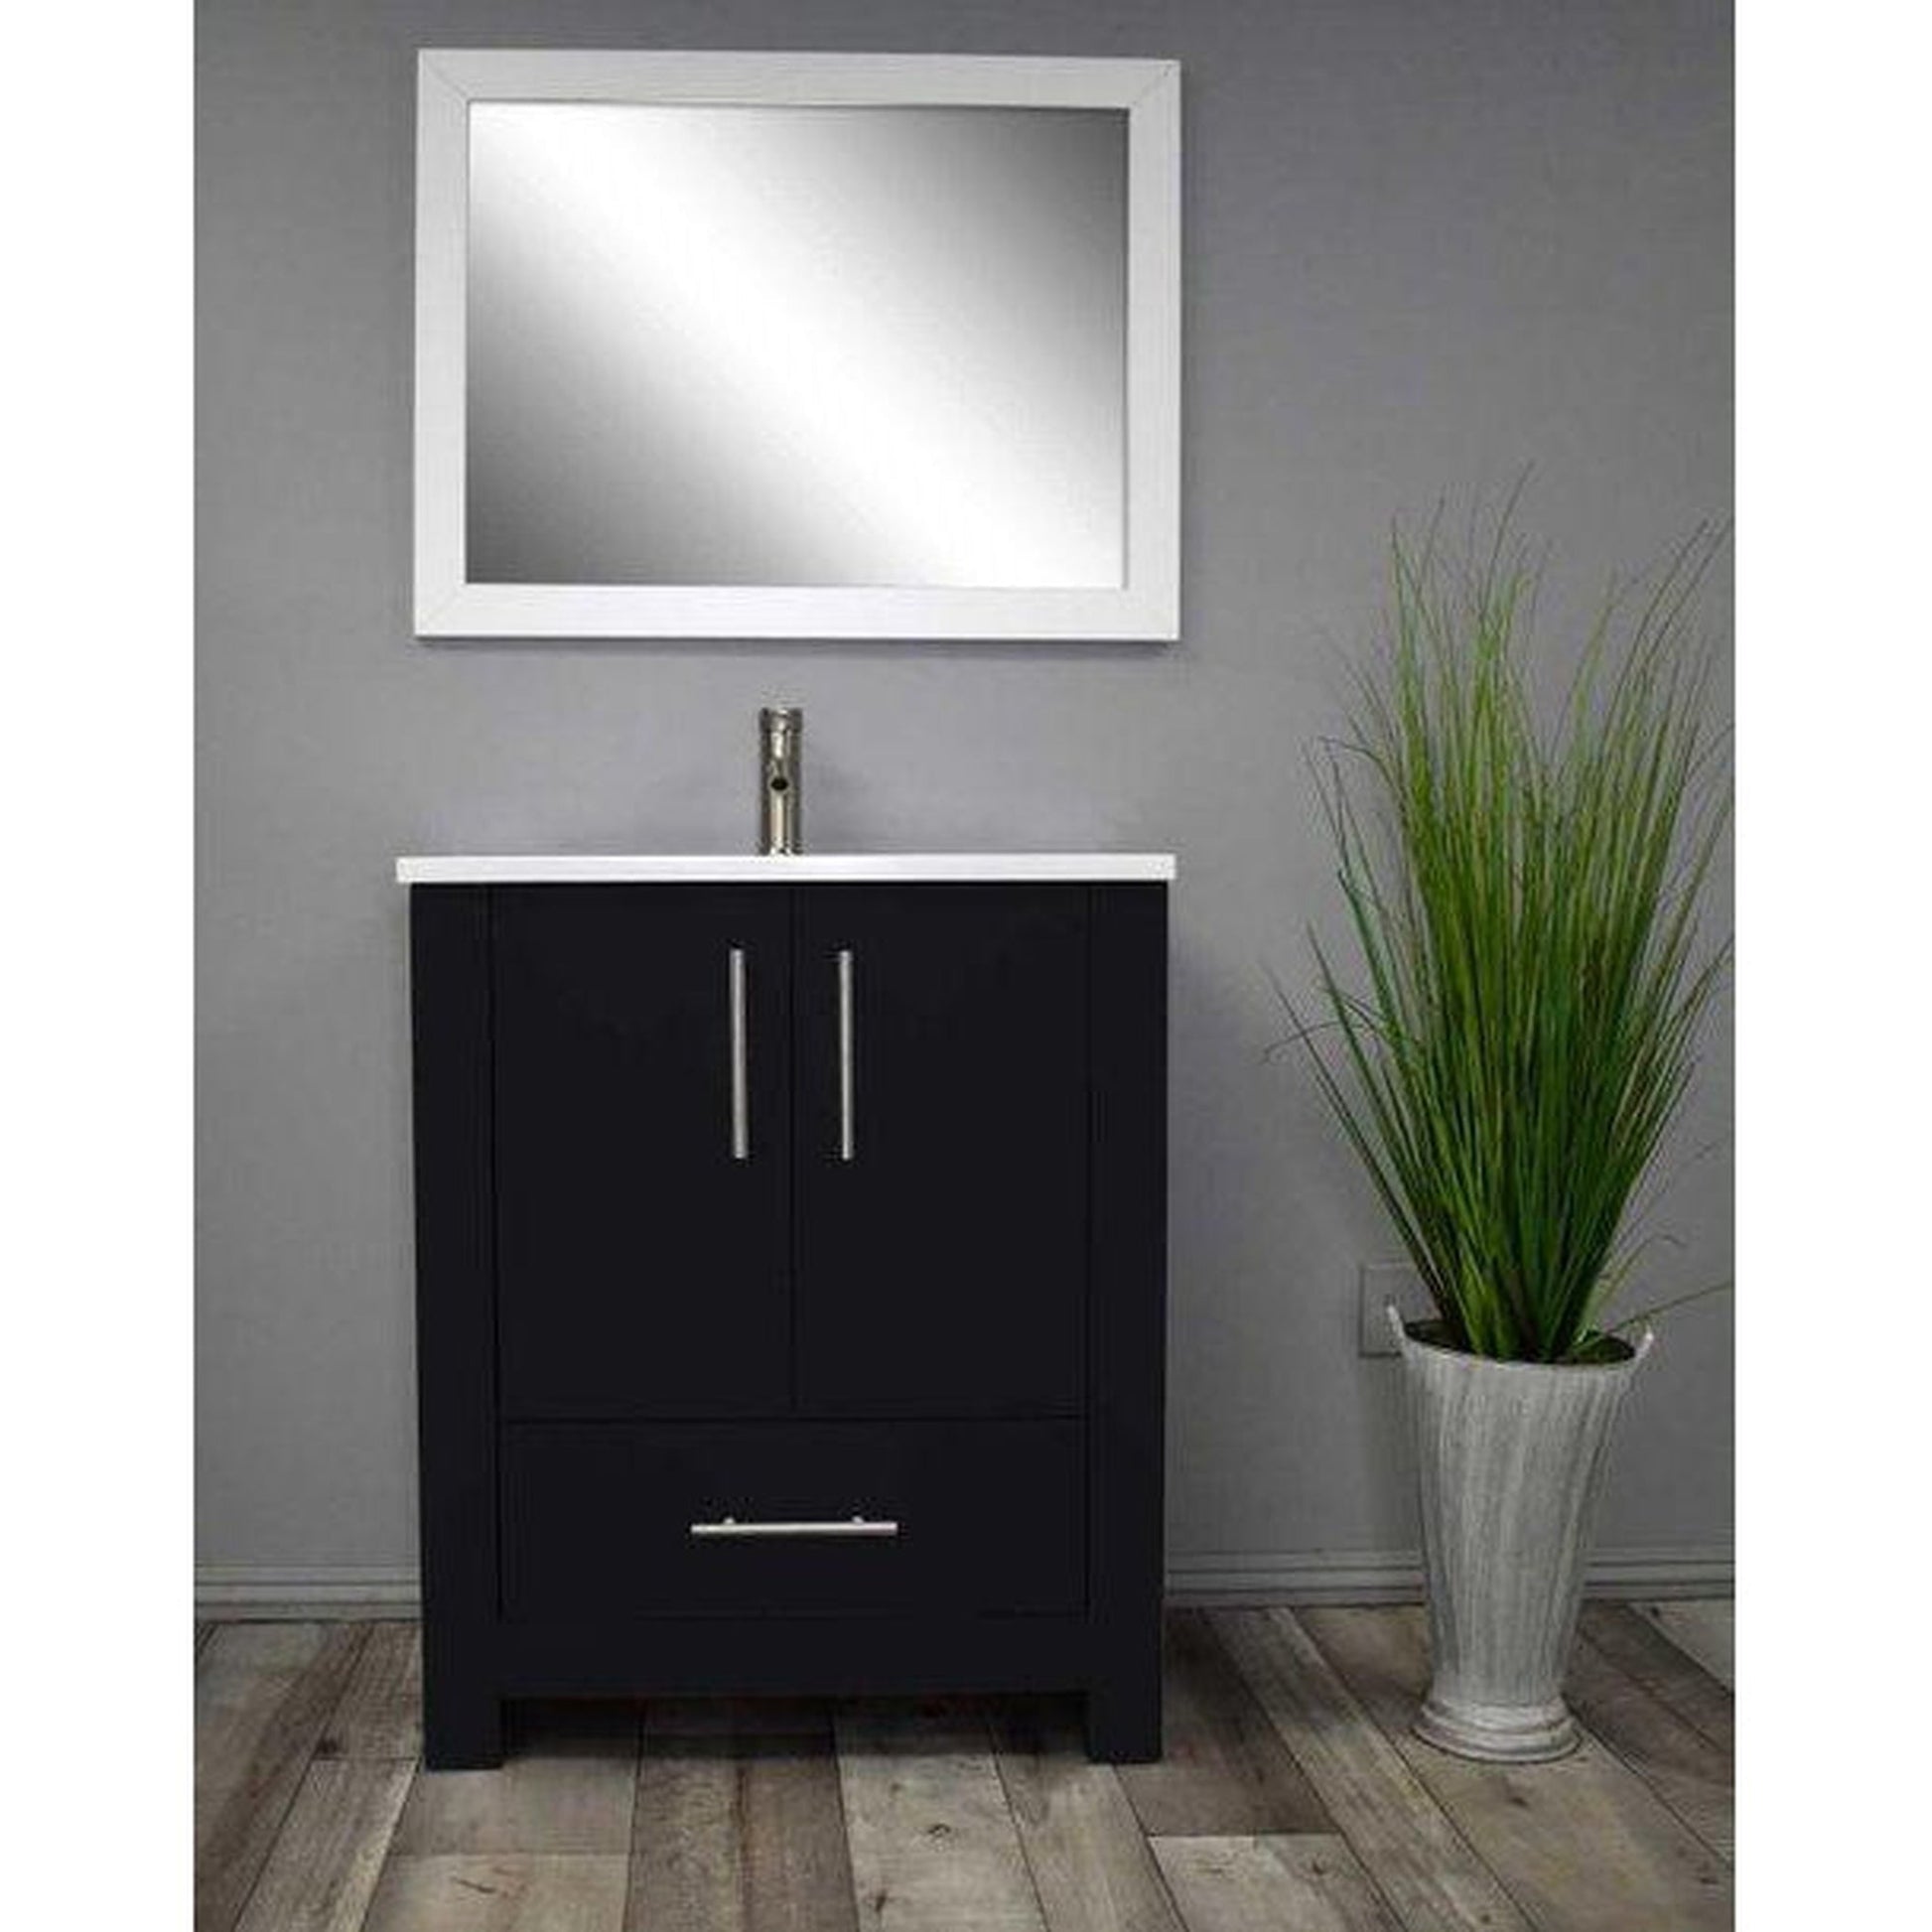 Volpa USA Boston 24" x 20" Glossy Black Modern Freestanding Bathroom Vanity With Acrylic Top, Integrated Acrylic Sink And Brushed Nickel Handles